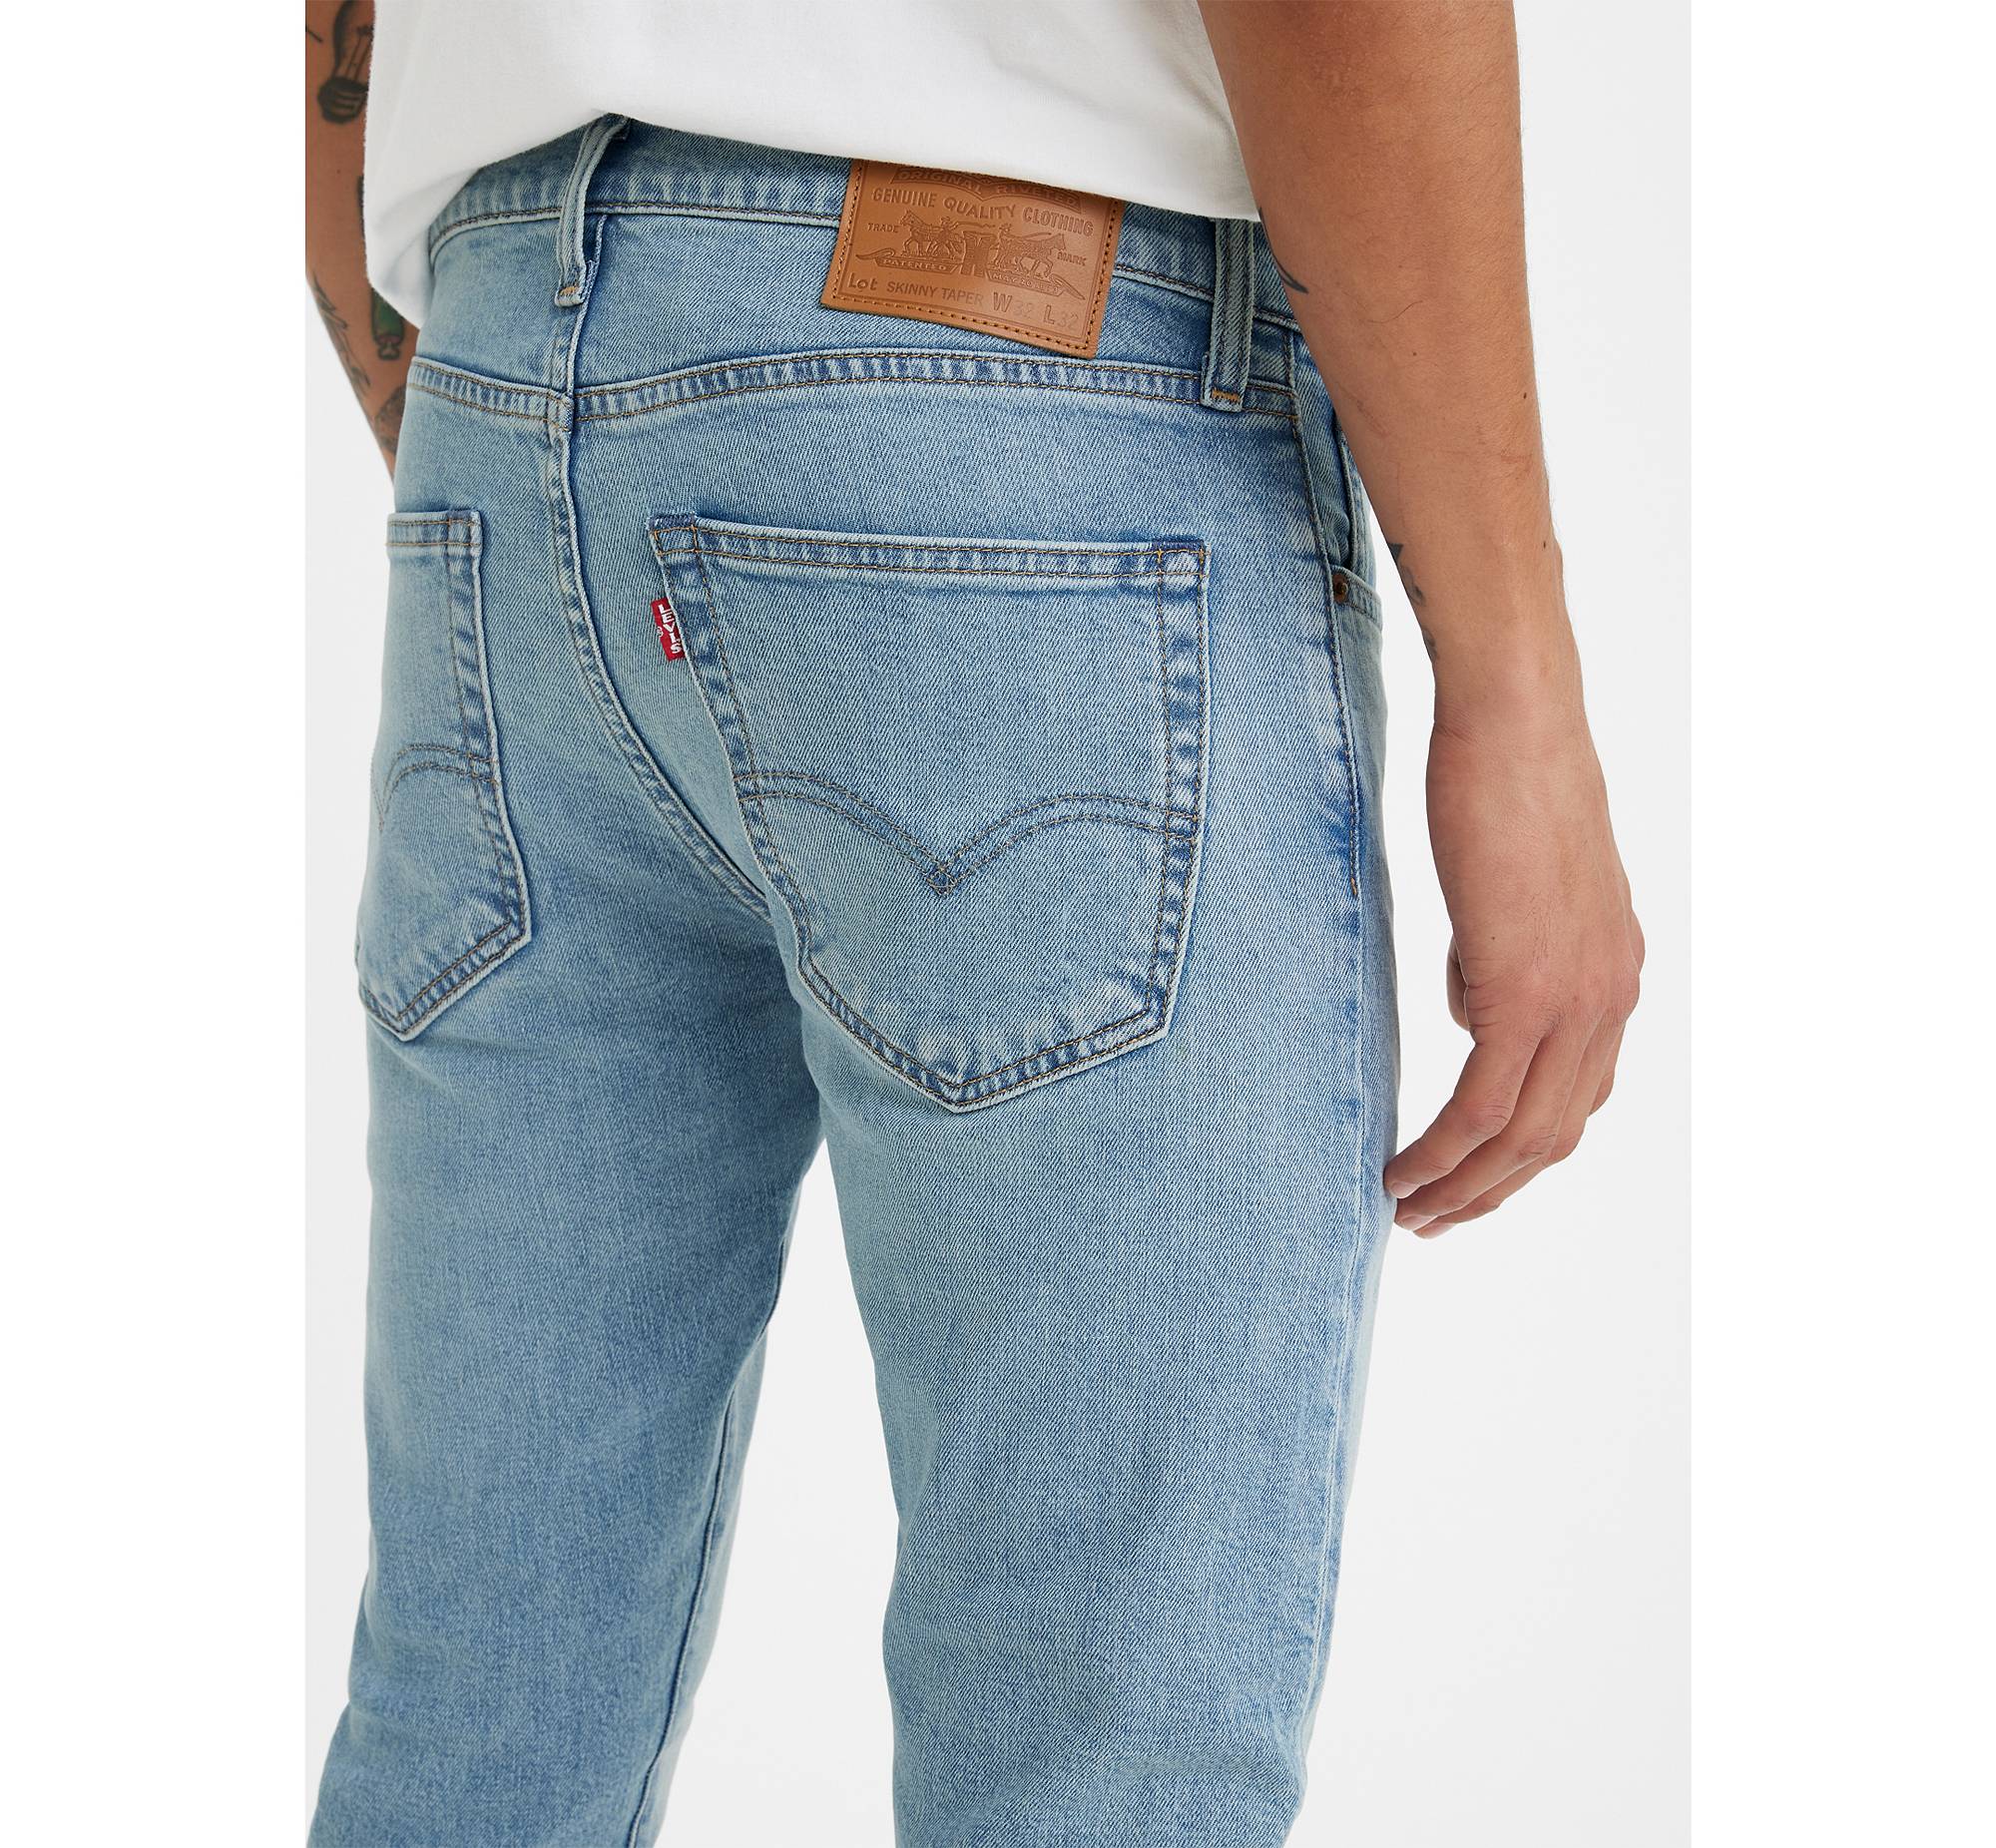 Skinny Tapered Jeans 4